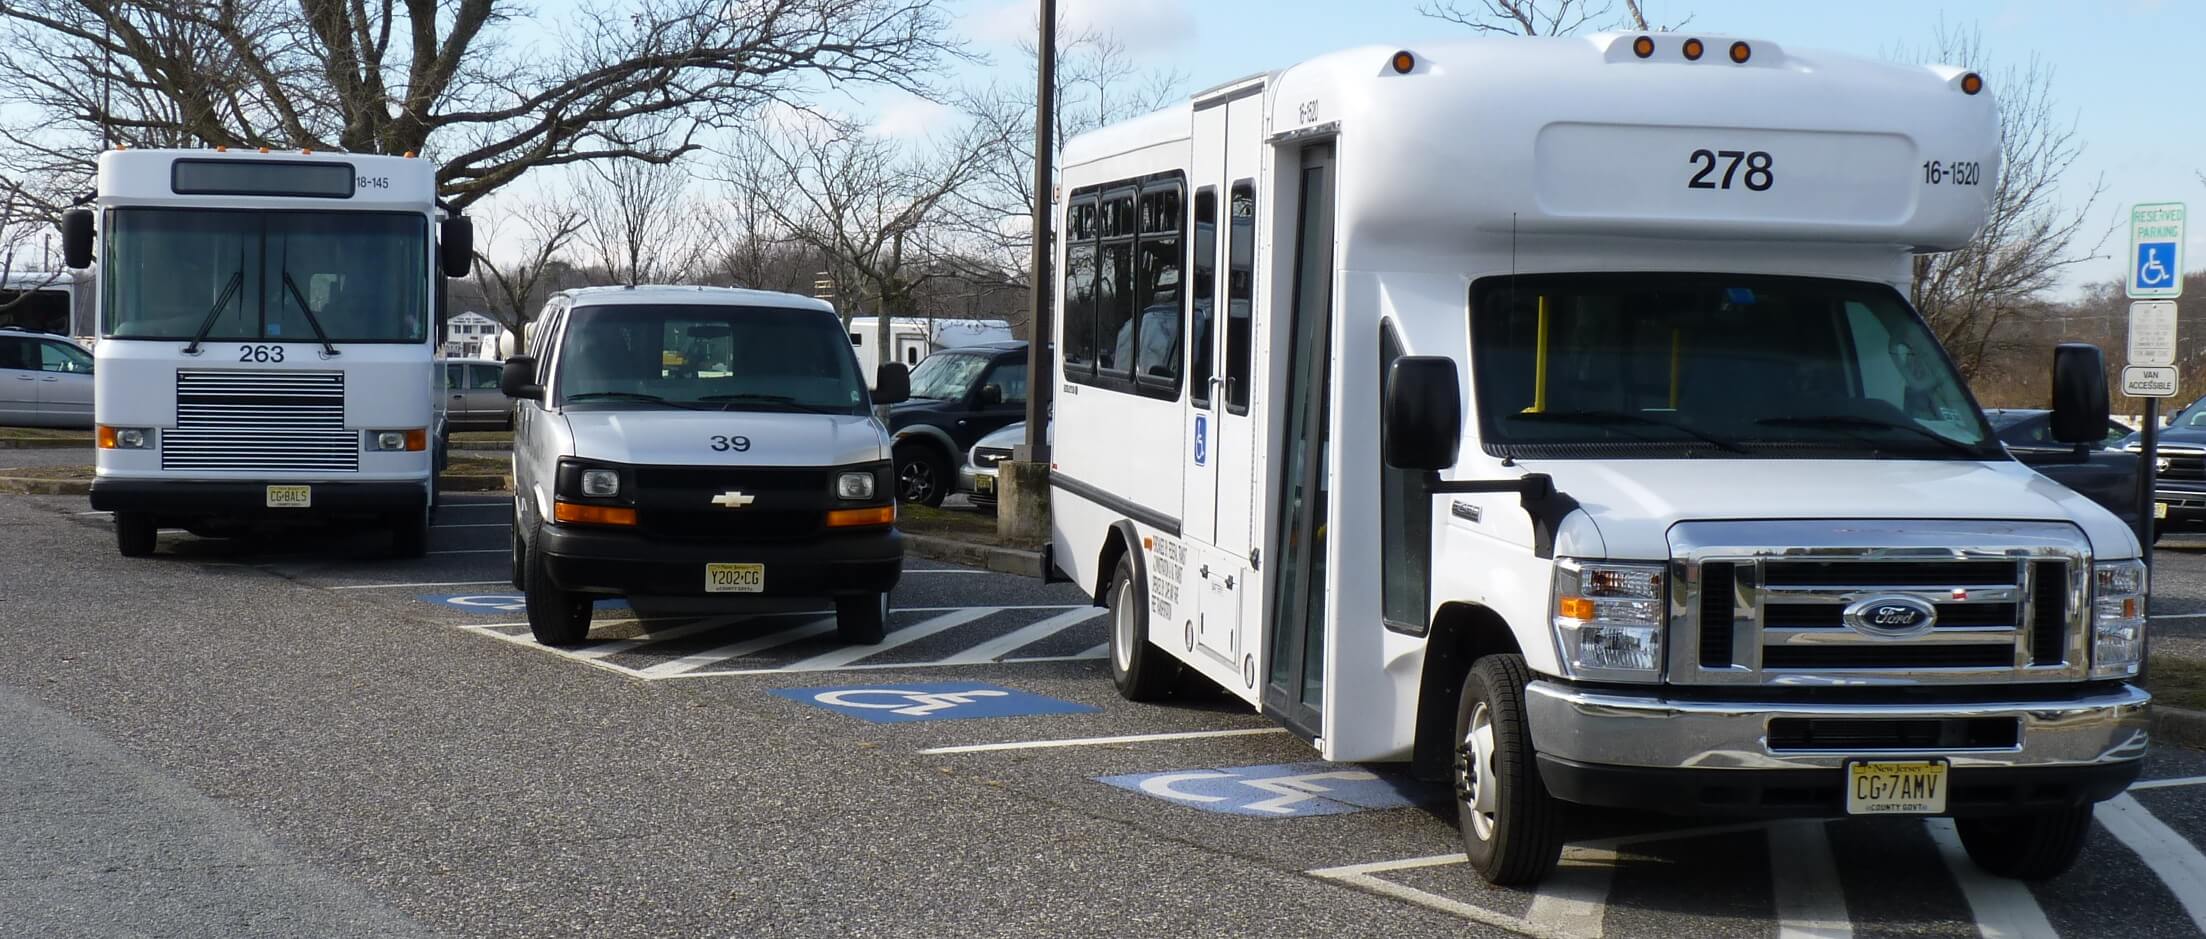 Cape May County Fare Free Transportation has a variety of vehicles to serve the population.